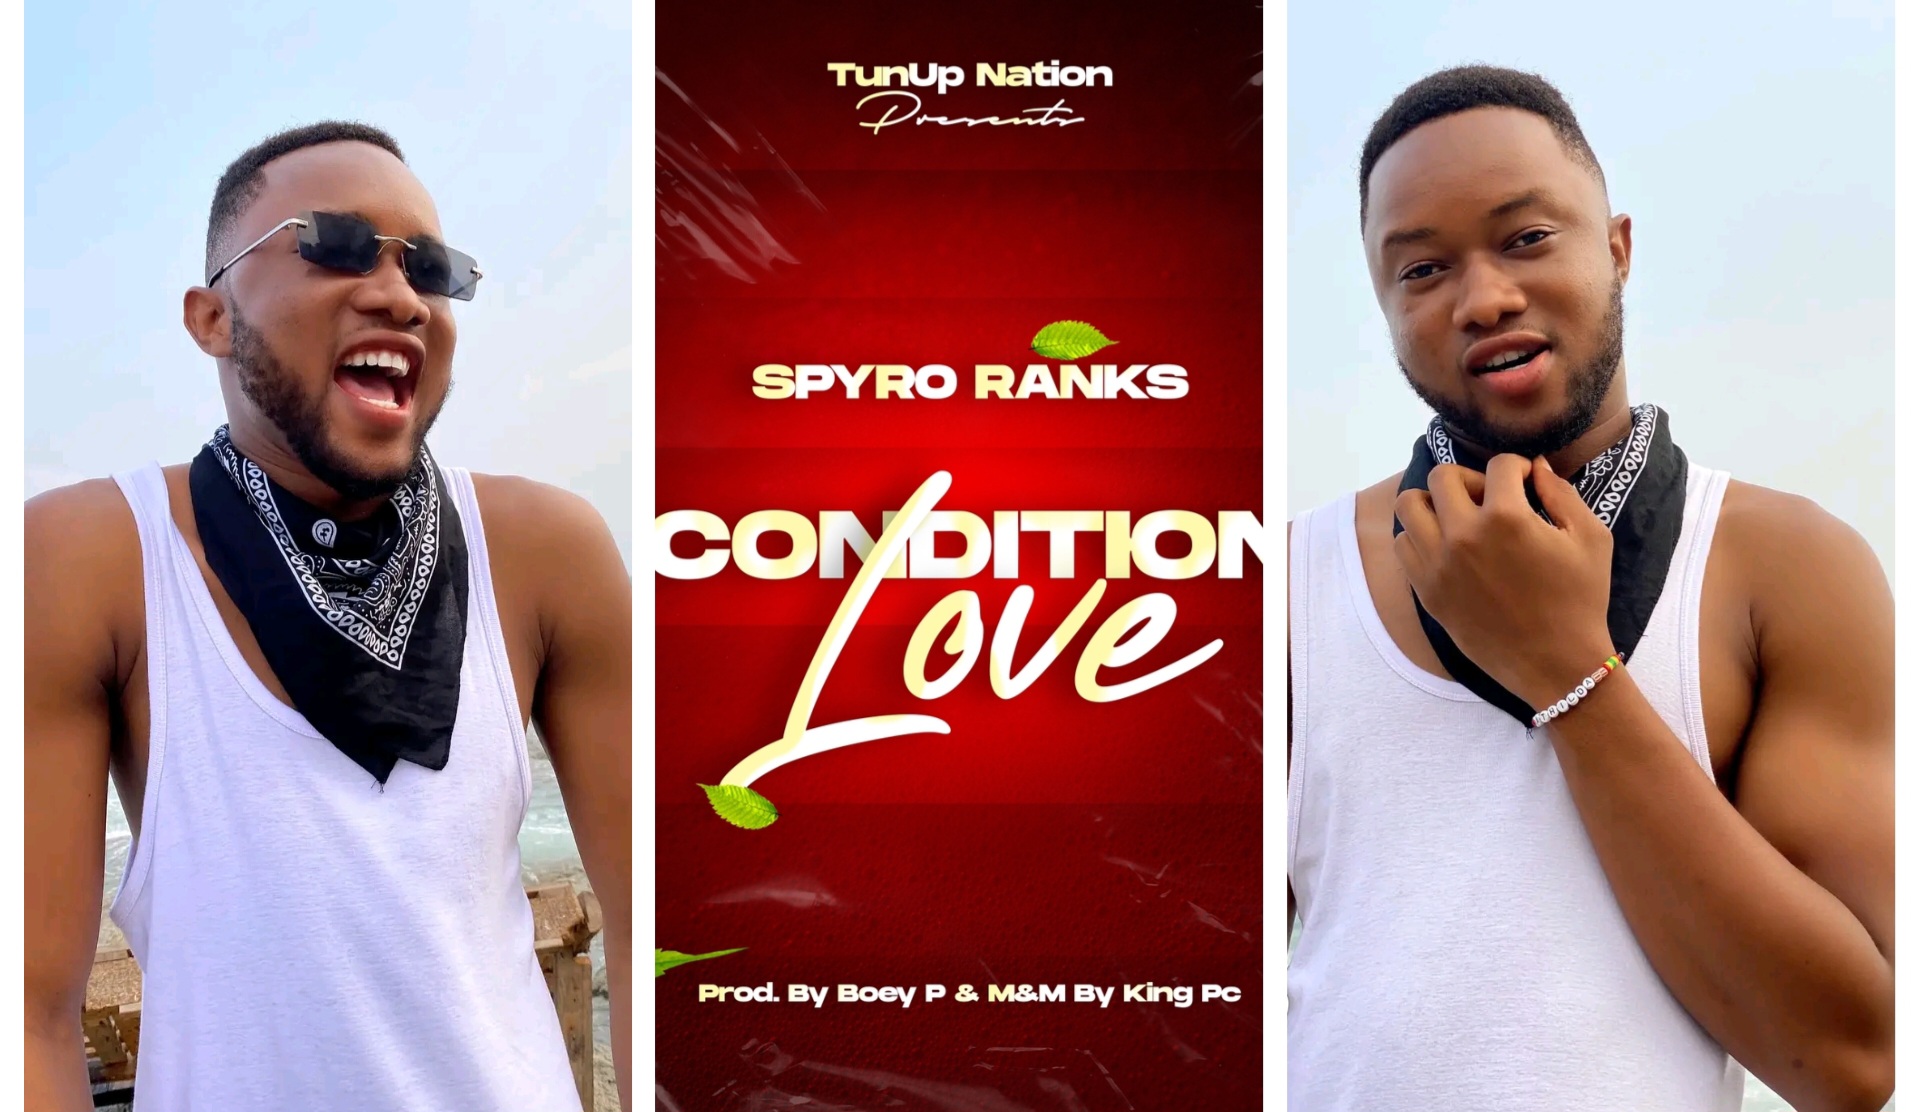 Spyro Ranks ready to drop a new song titled  ” unconditional love” from his upcoming album(Details here)